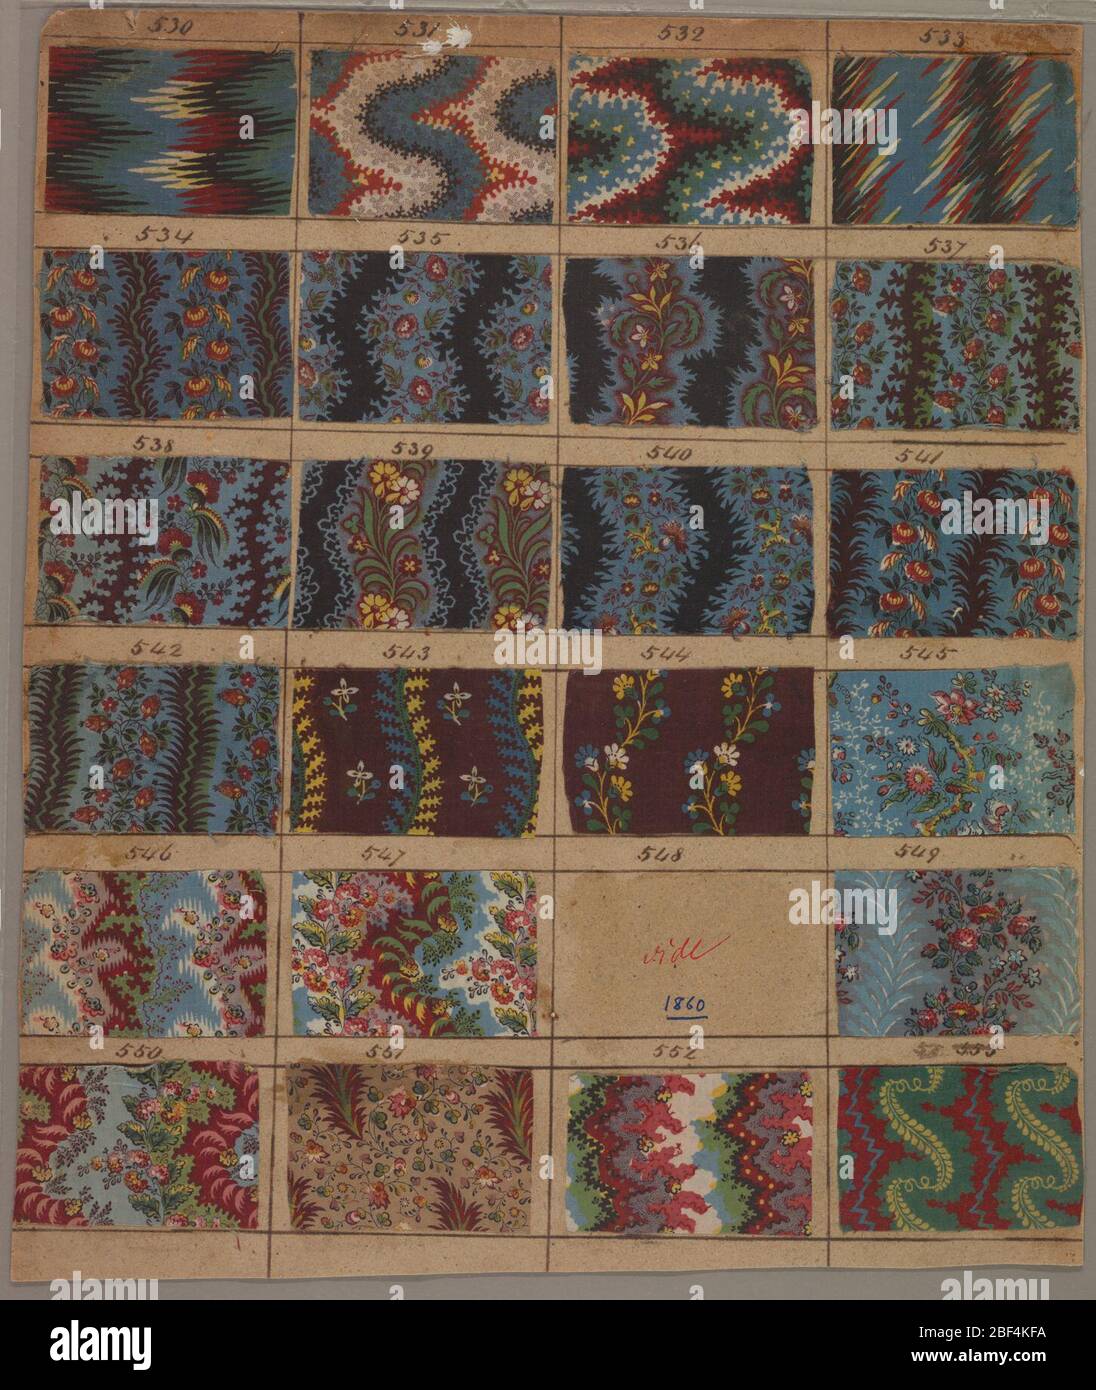 Textile. Forty-six swatches of printed fabric (twenty-three per side of page – one missing on each side) each numbered in pen and ink from 506 through 529. Each swatch measures about 5.5 x 8 cm. (2 1/8' x 3 1/8'). Stock Photo